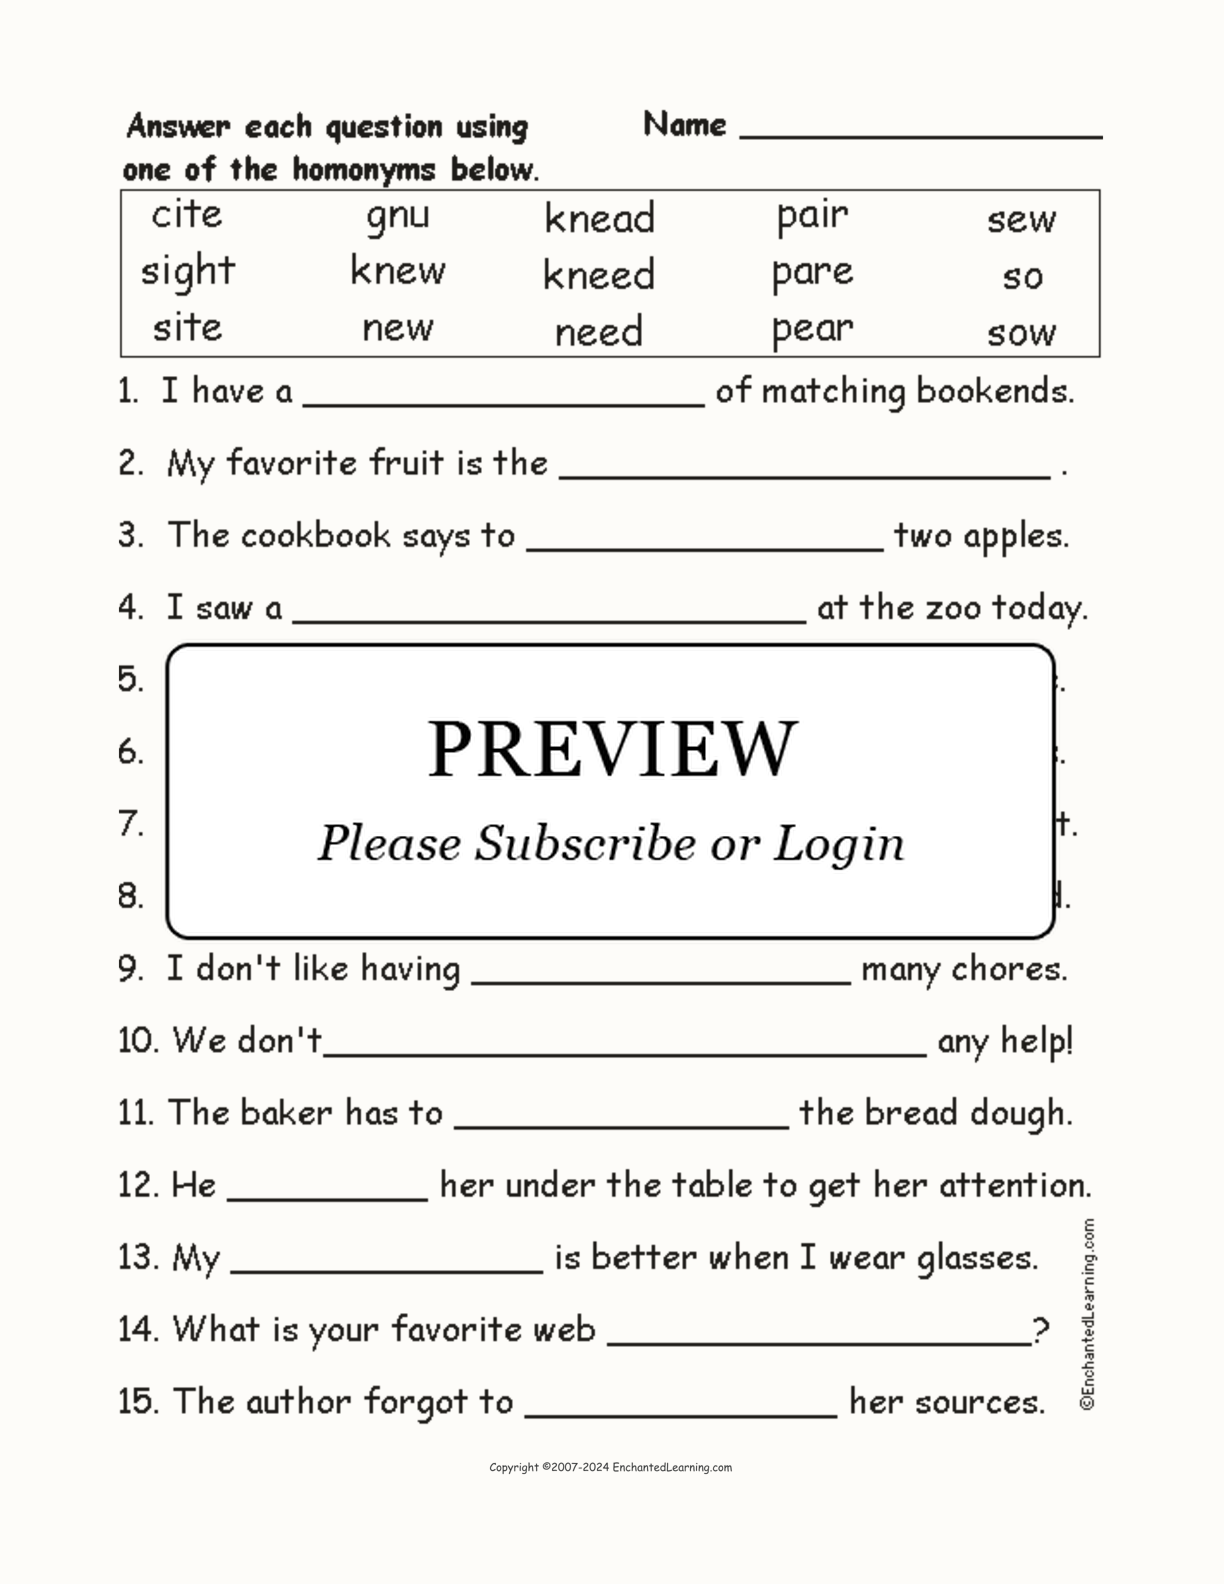 Homonyms Spelling Word Questions #3 interactive worksheet page 1